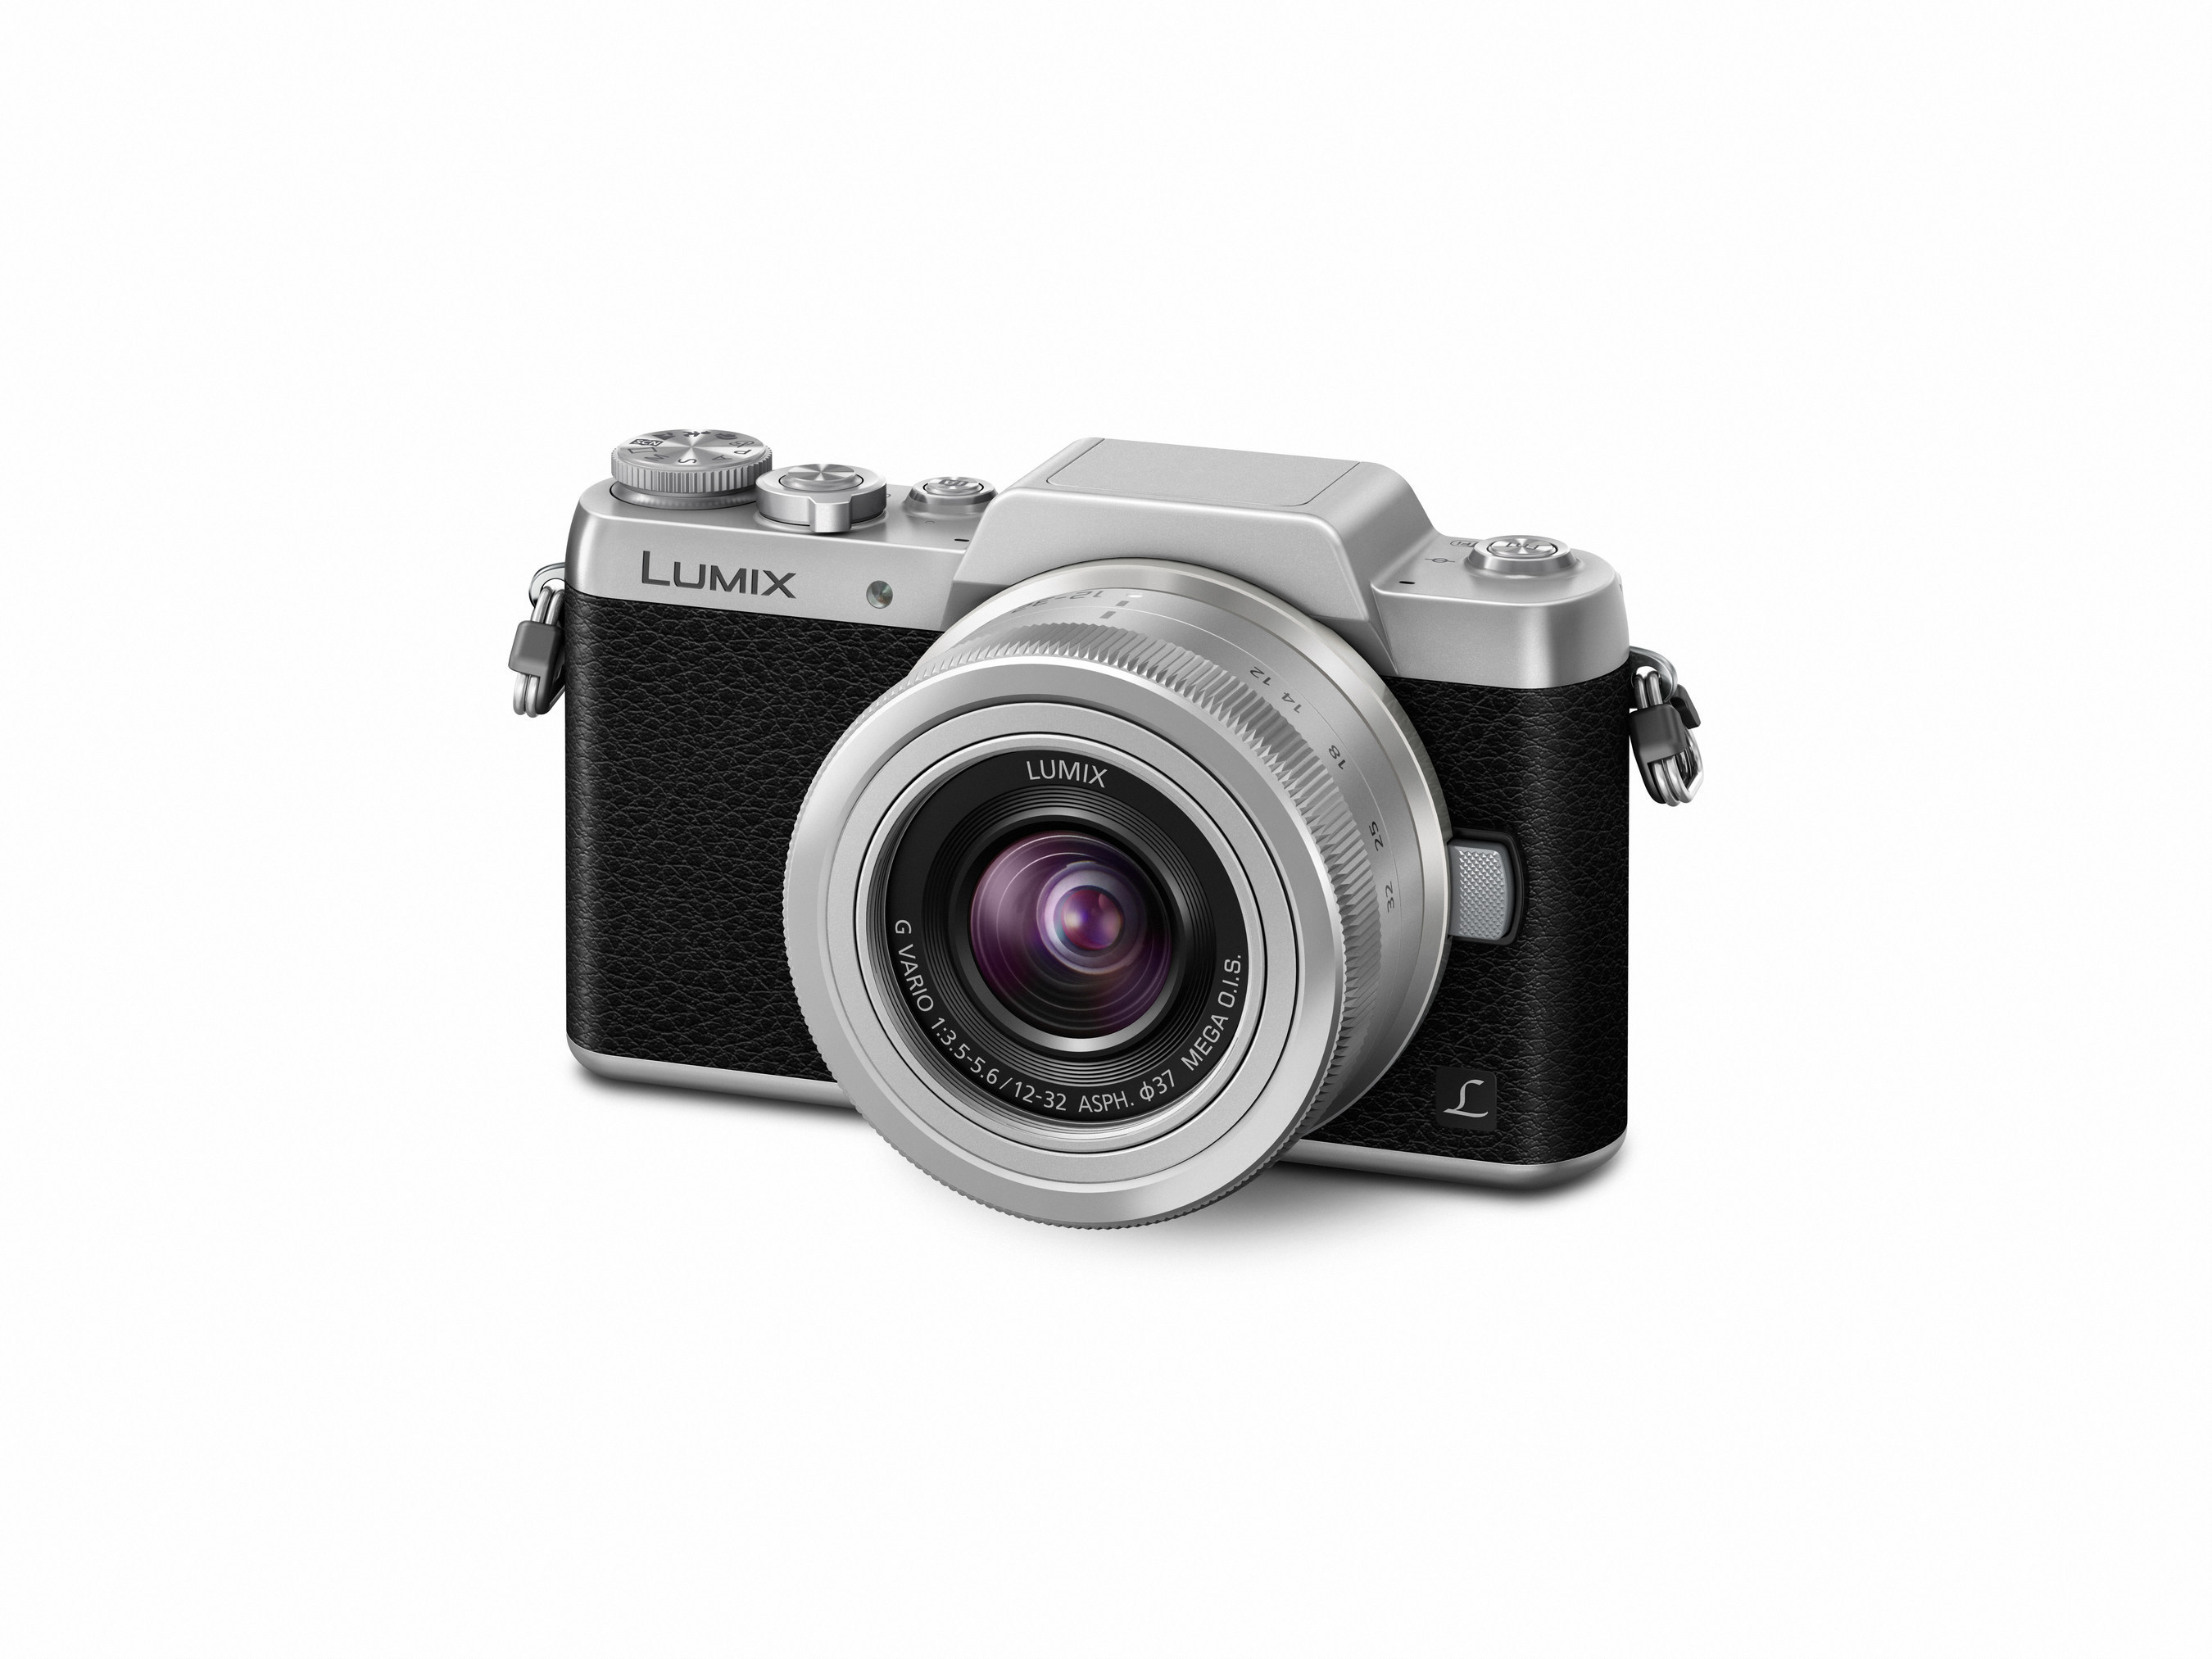 Panasonic LUMIX GF7 Featuring Modern Selfie Functions with Classic Styling